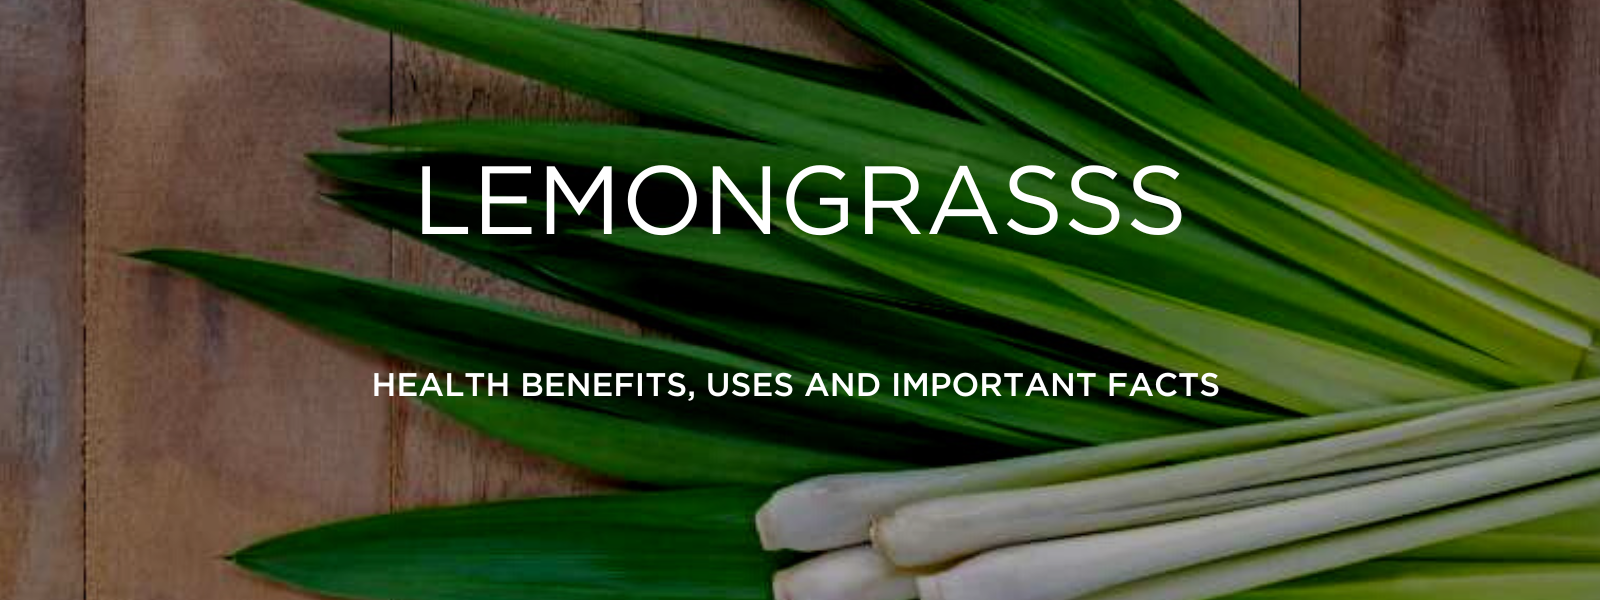 Lemongrass - Health Benefits, Uses and Important Facts